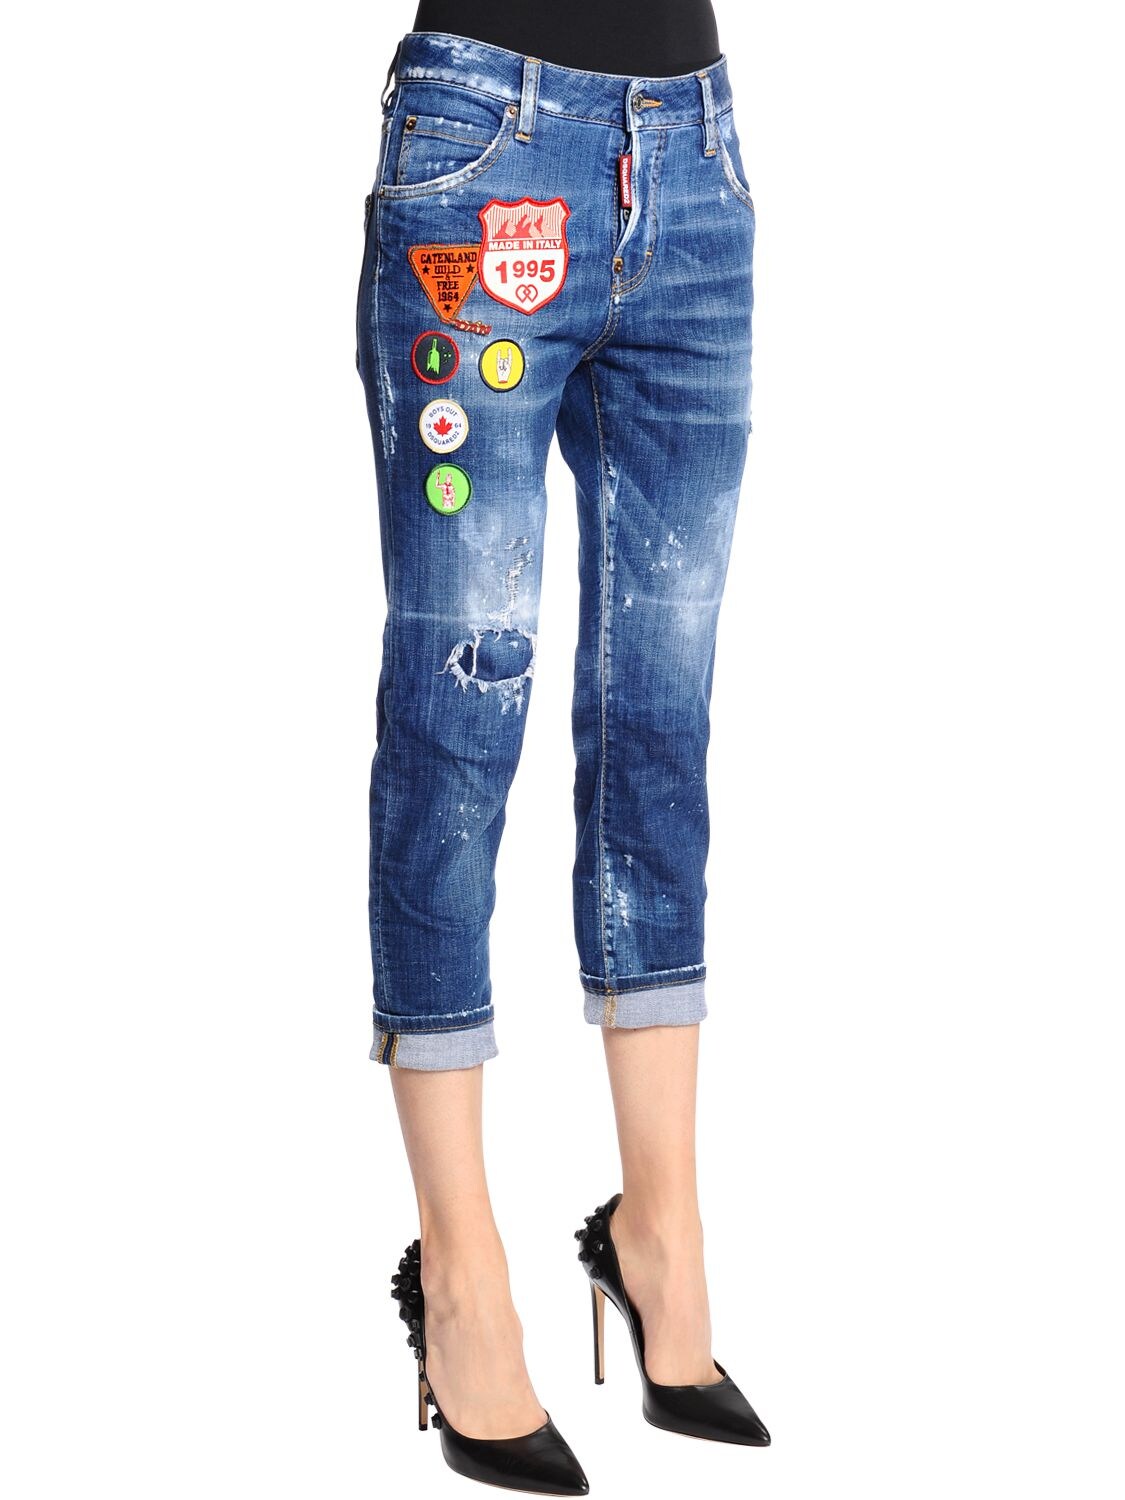 DSQUARED2 COOL GIRL SCOUT PATCHES CROP DENIM JEANS,67I07Y036-NDcw0